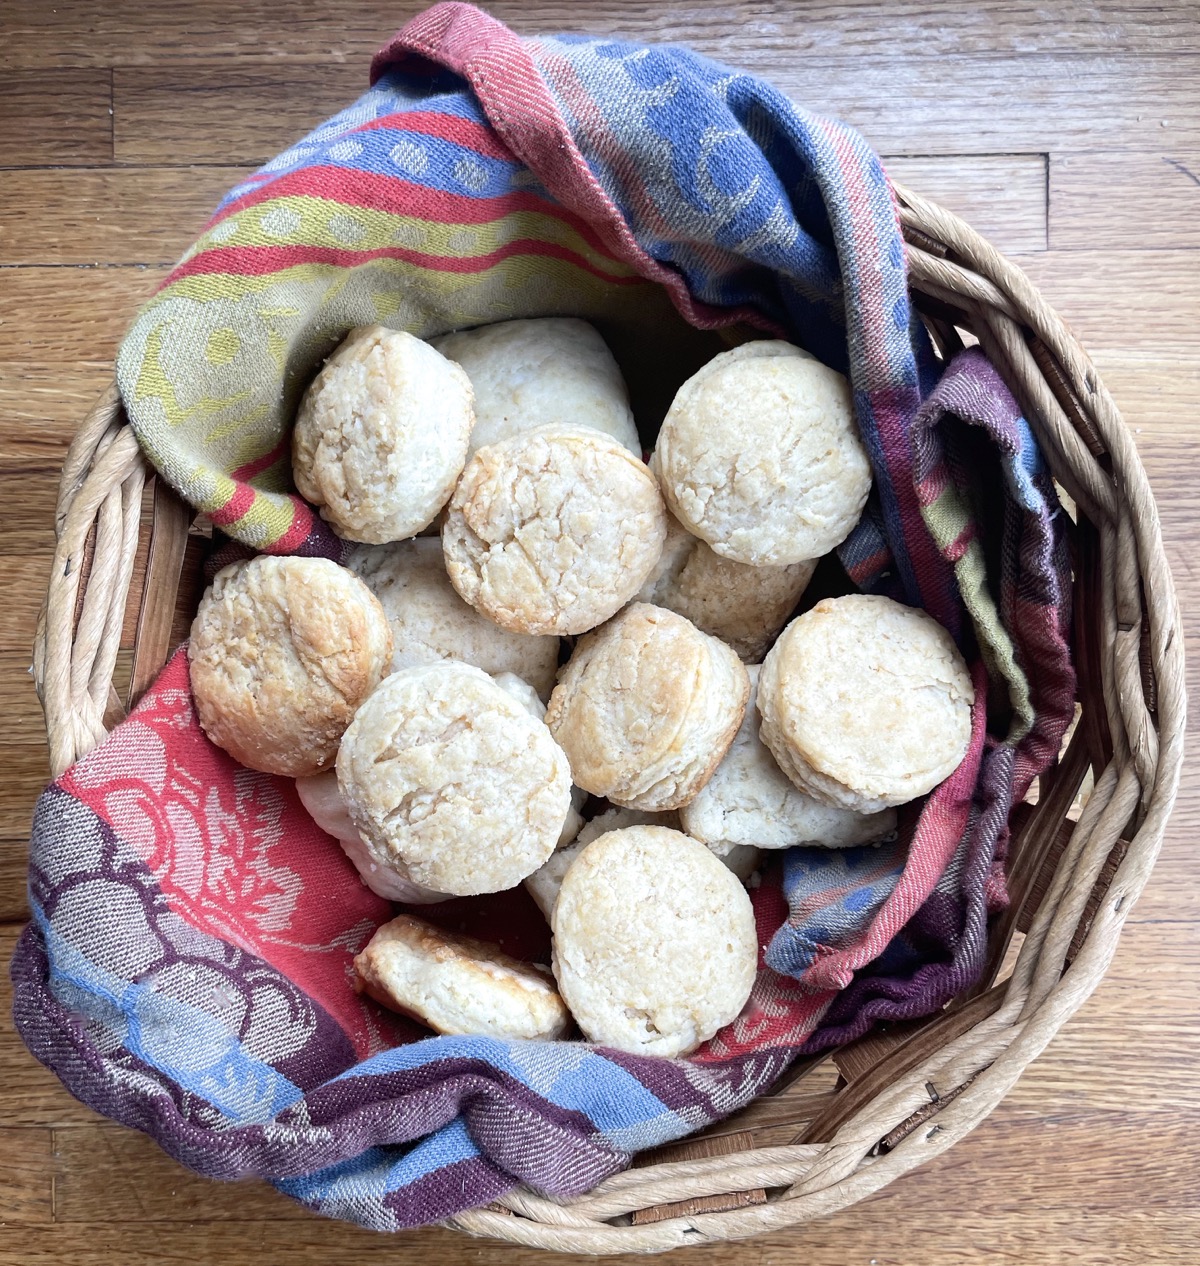 Baked sourdough biscuits in a woven basket lined with a colorful towel.